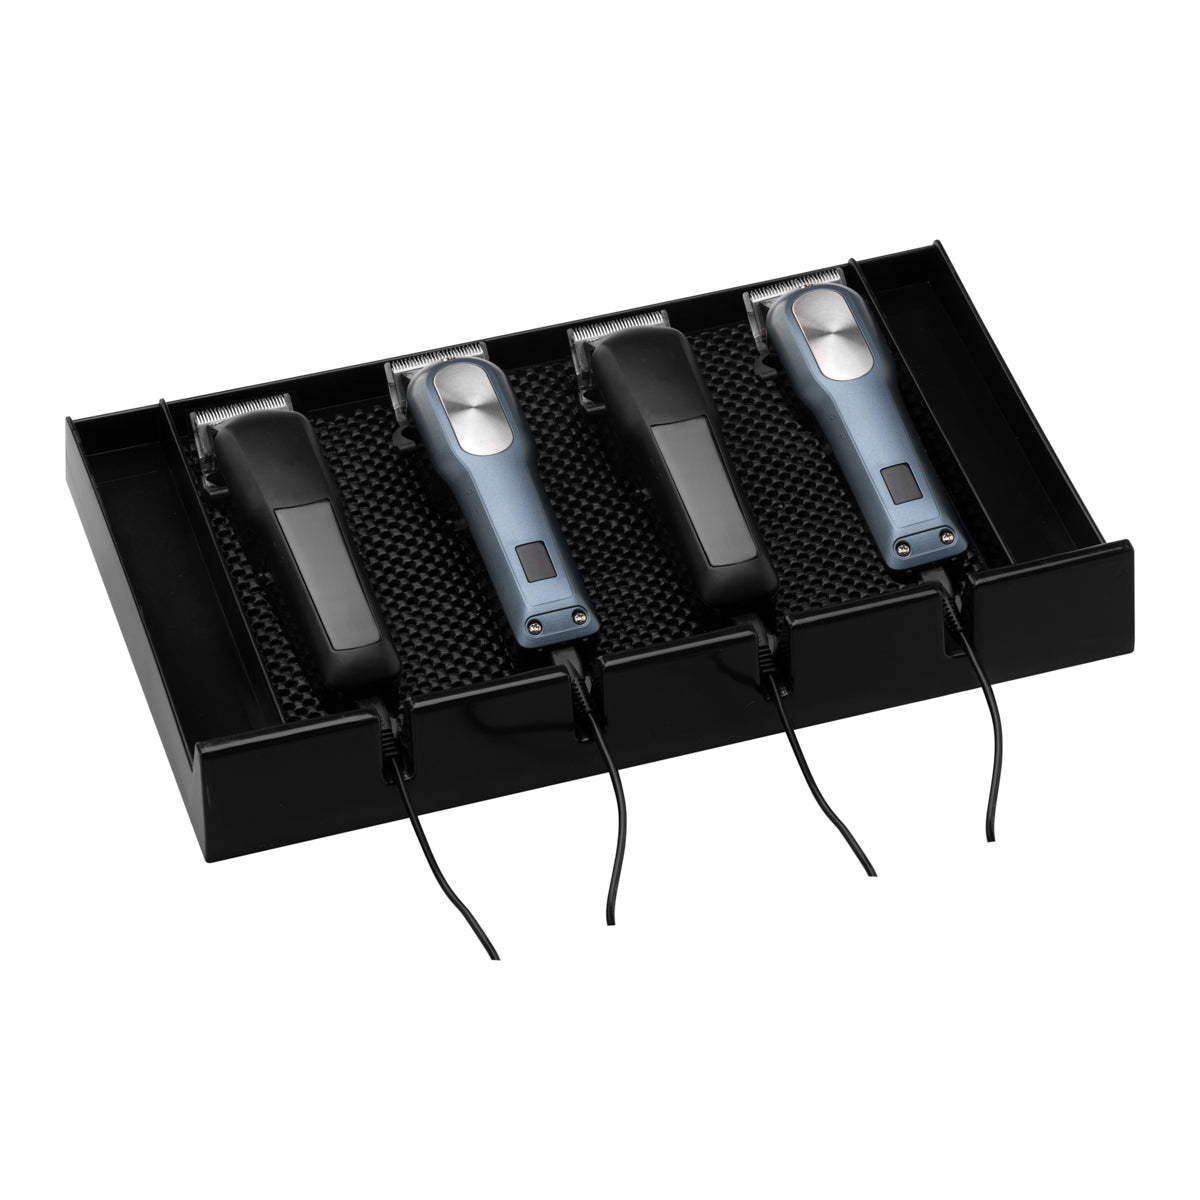 ACTIVESHOP ORGANIZER FOR HAIRDRESSING CLIPPERS